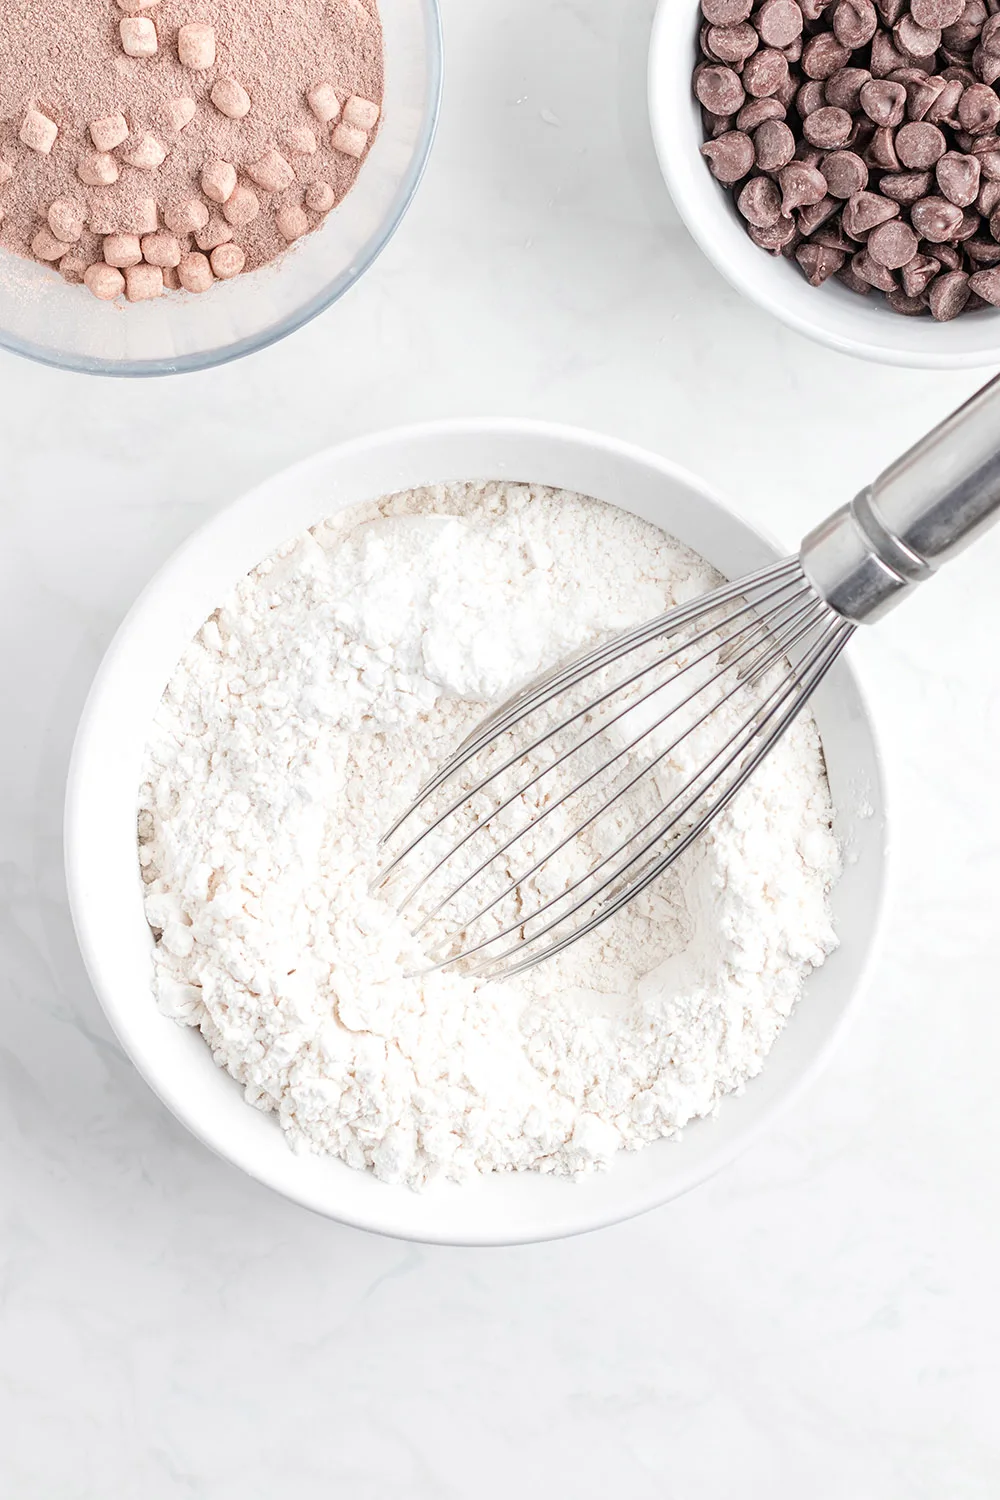 Flour mixture in a bowl with a whisk.